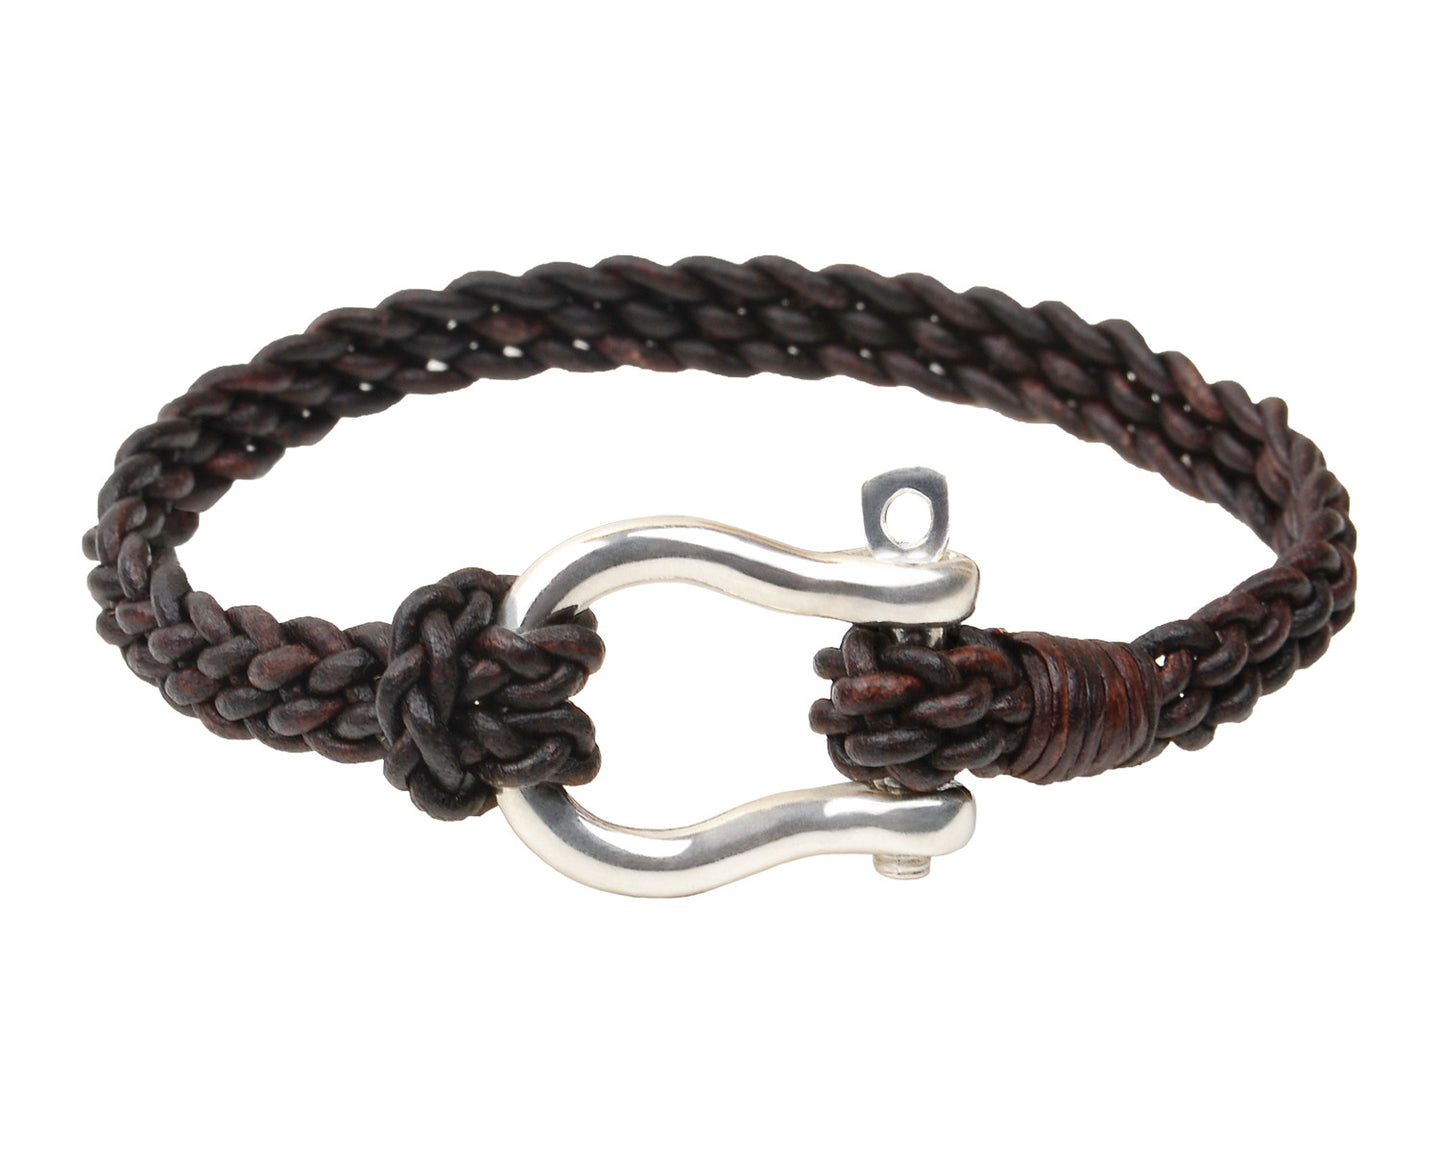 Buy The Friendly Swede Paracord Survival Bracelet with Micro Cord and D Shackle  Adjustable Size Online at Lowest Price in Ubuy India B0749K9LWH